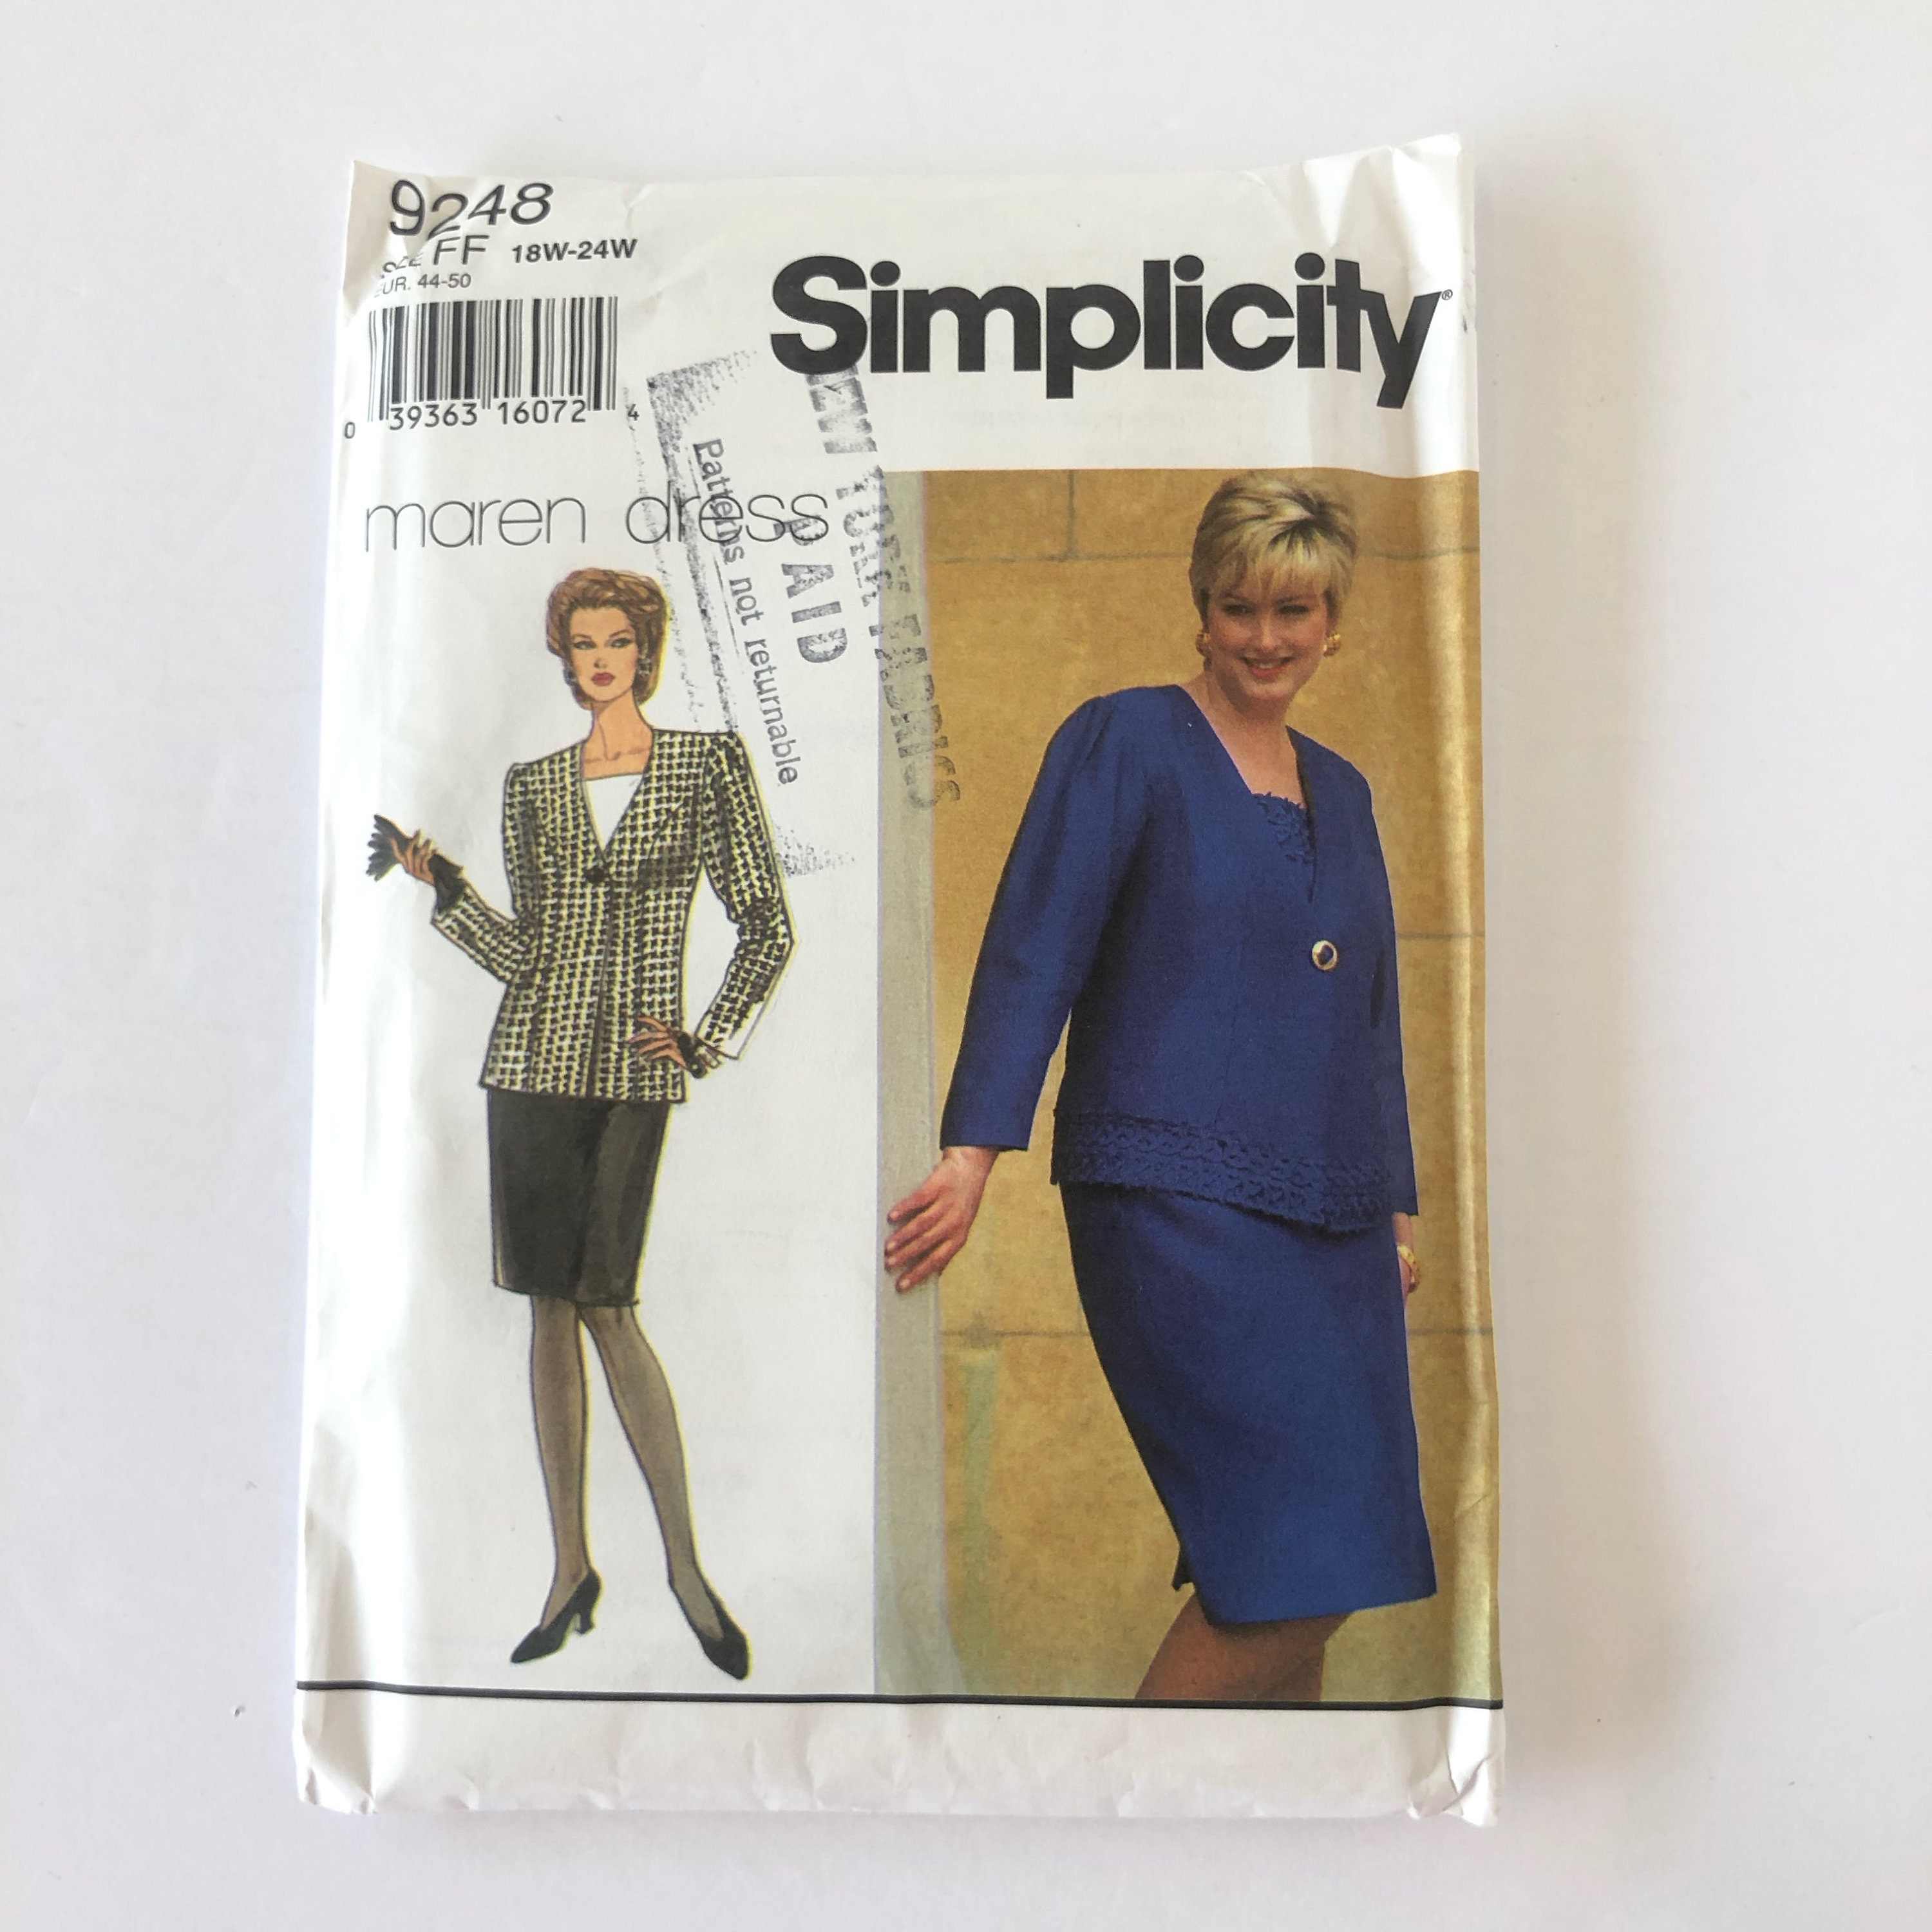 Simplicity 5151 Vintage 1960's Women's Suit and Overblouse Sewing Pattern  Misses Size 16